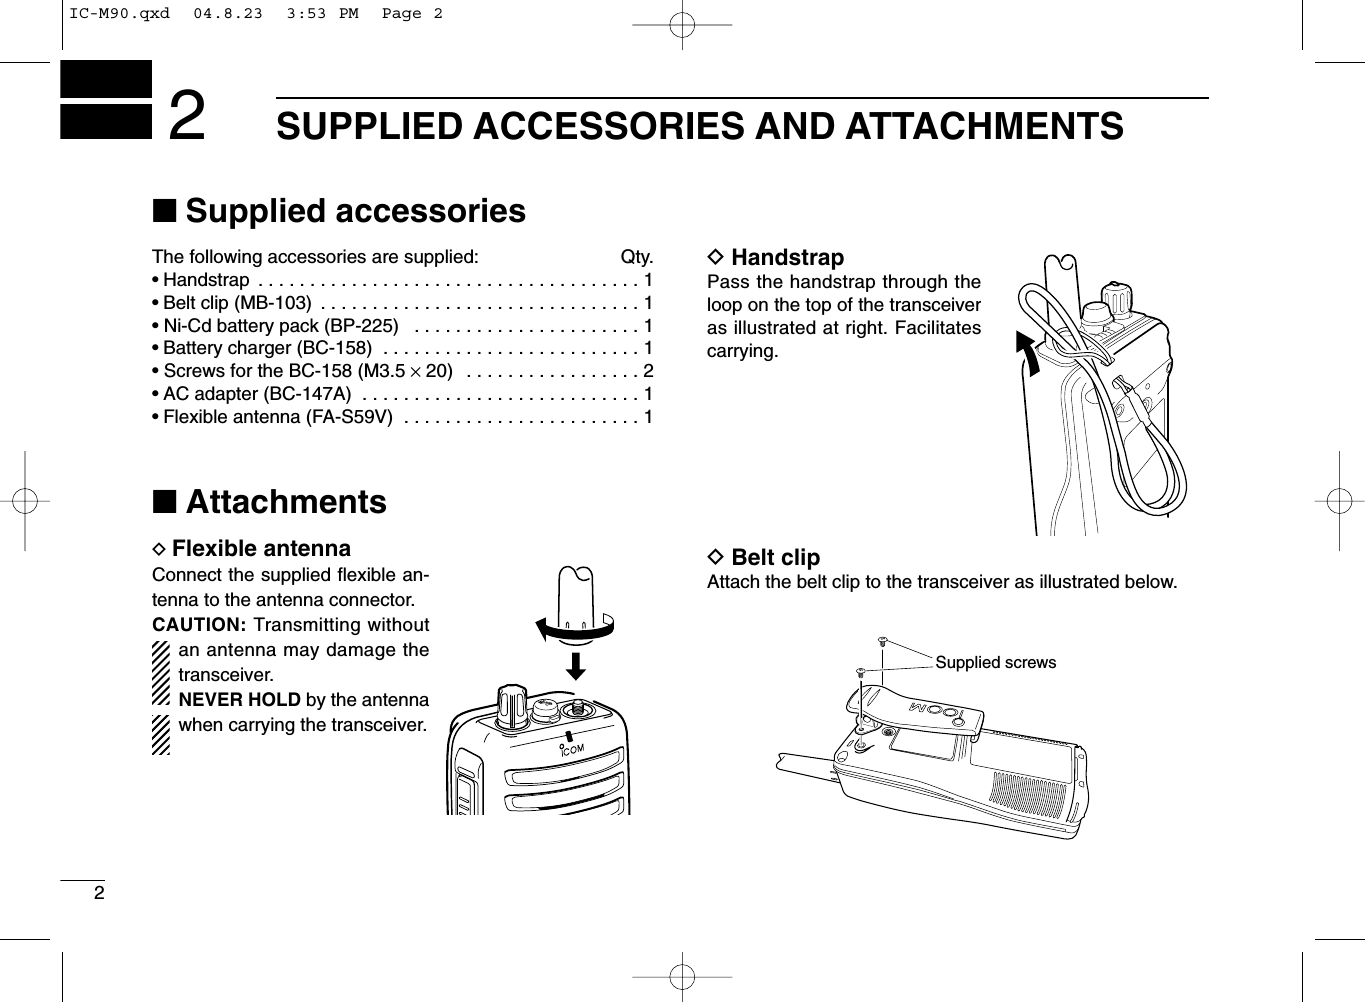 2SUPPLIED ACCESSORIES AND ATTACHMENTS2■Supplied accessoriesThe following accessories are supplied: Qty.• Handstrap  . . . . . . . . . . . . . . . . . . . . . . . . . . . . . . . . . . . . . 1• Belt clip (MB-103)  . . . . . . . . . . . . . . . . . . . . . . . . . . . . . . . 1• Ni-Cd battery pack (BP-225)  . . . . . . . . . . . . . . . . . . . . . . 1• Battery charger (BC-158)  . . . . . . . . . . . . . . . . . . . . . . . . . 1• Screws for the BC-158 (M3.5 ×20)  . . . . . . . . . . . . . . . . . 2• AC adapter (BC-147A)  . . . . . . . . . . . . . . . . . . . . . . . . . . . 1• Flexible antenna (FA-S59V)  . . . . . . . . . . . . . . . . . . . . . . . 1■AttachmentsDFlexible antennaConnect the supplied ﬂexible an-tenna to the antenna connector.CAUTION: Transmitting withoutan antenna may damage thetransceiver.NEVER HOLD by the antennawhen carrying the transceiver.DHandstrapPass the handstrap through theloop on the top of the transceiveras illustrated at right. Facilitatescarrying.DBelt clipAttach the belt clip to the transceiver as illustrated below.Supplied screwsMIC  /SPIC-M90.qxd  04.8.23  3:53 PM  Page 2